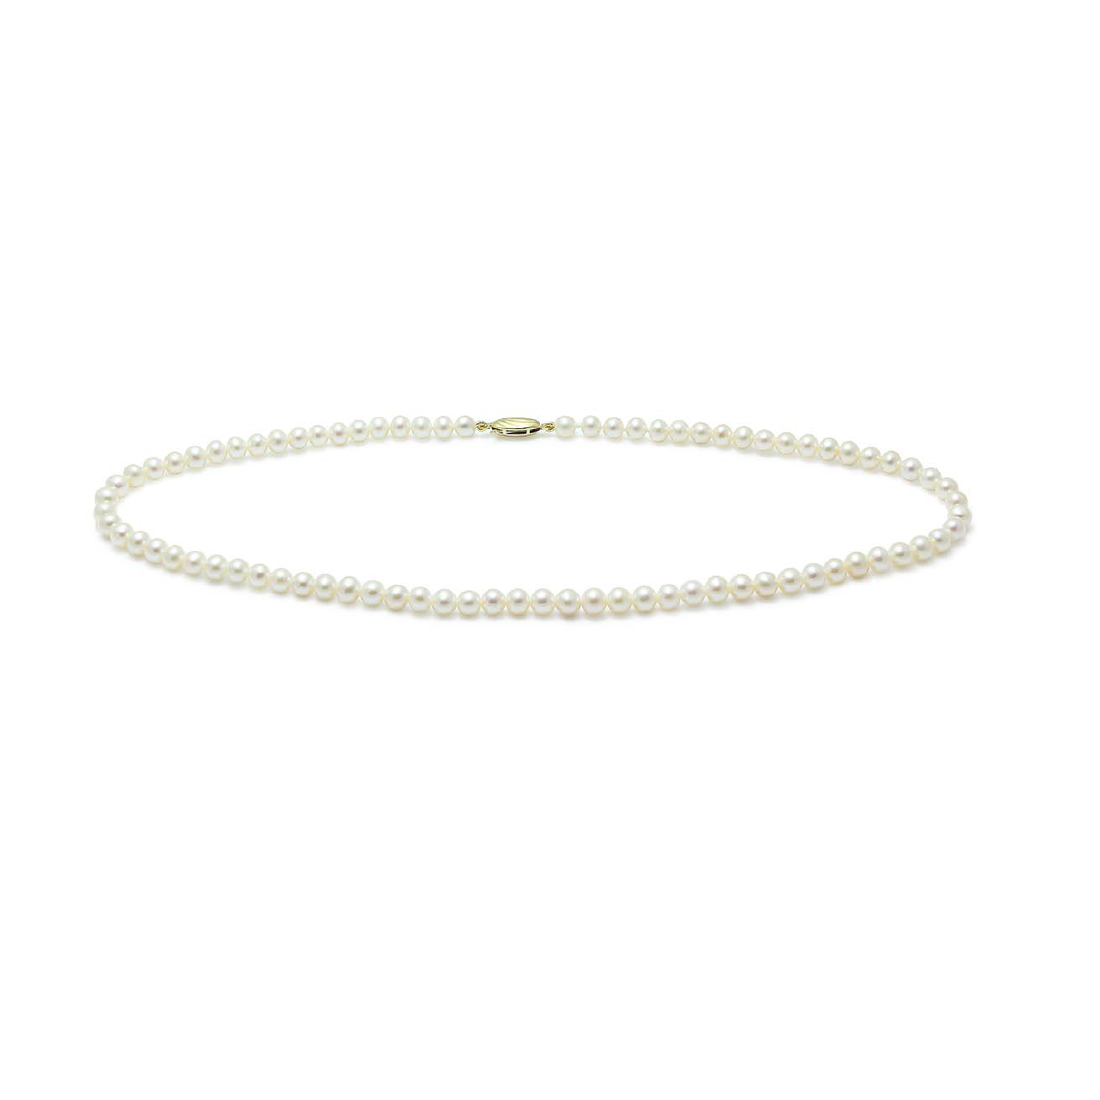 5mm Cultured River Pearl Necklace with Silver Clasp - Robert Anthony Jewellers, Edinburgh